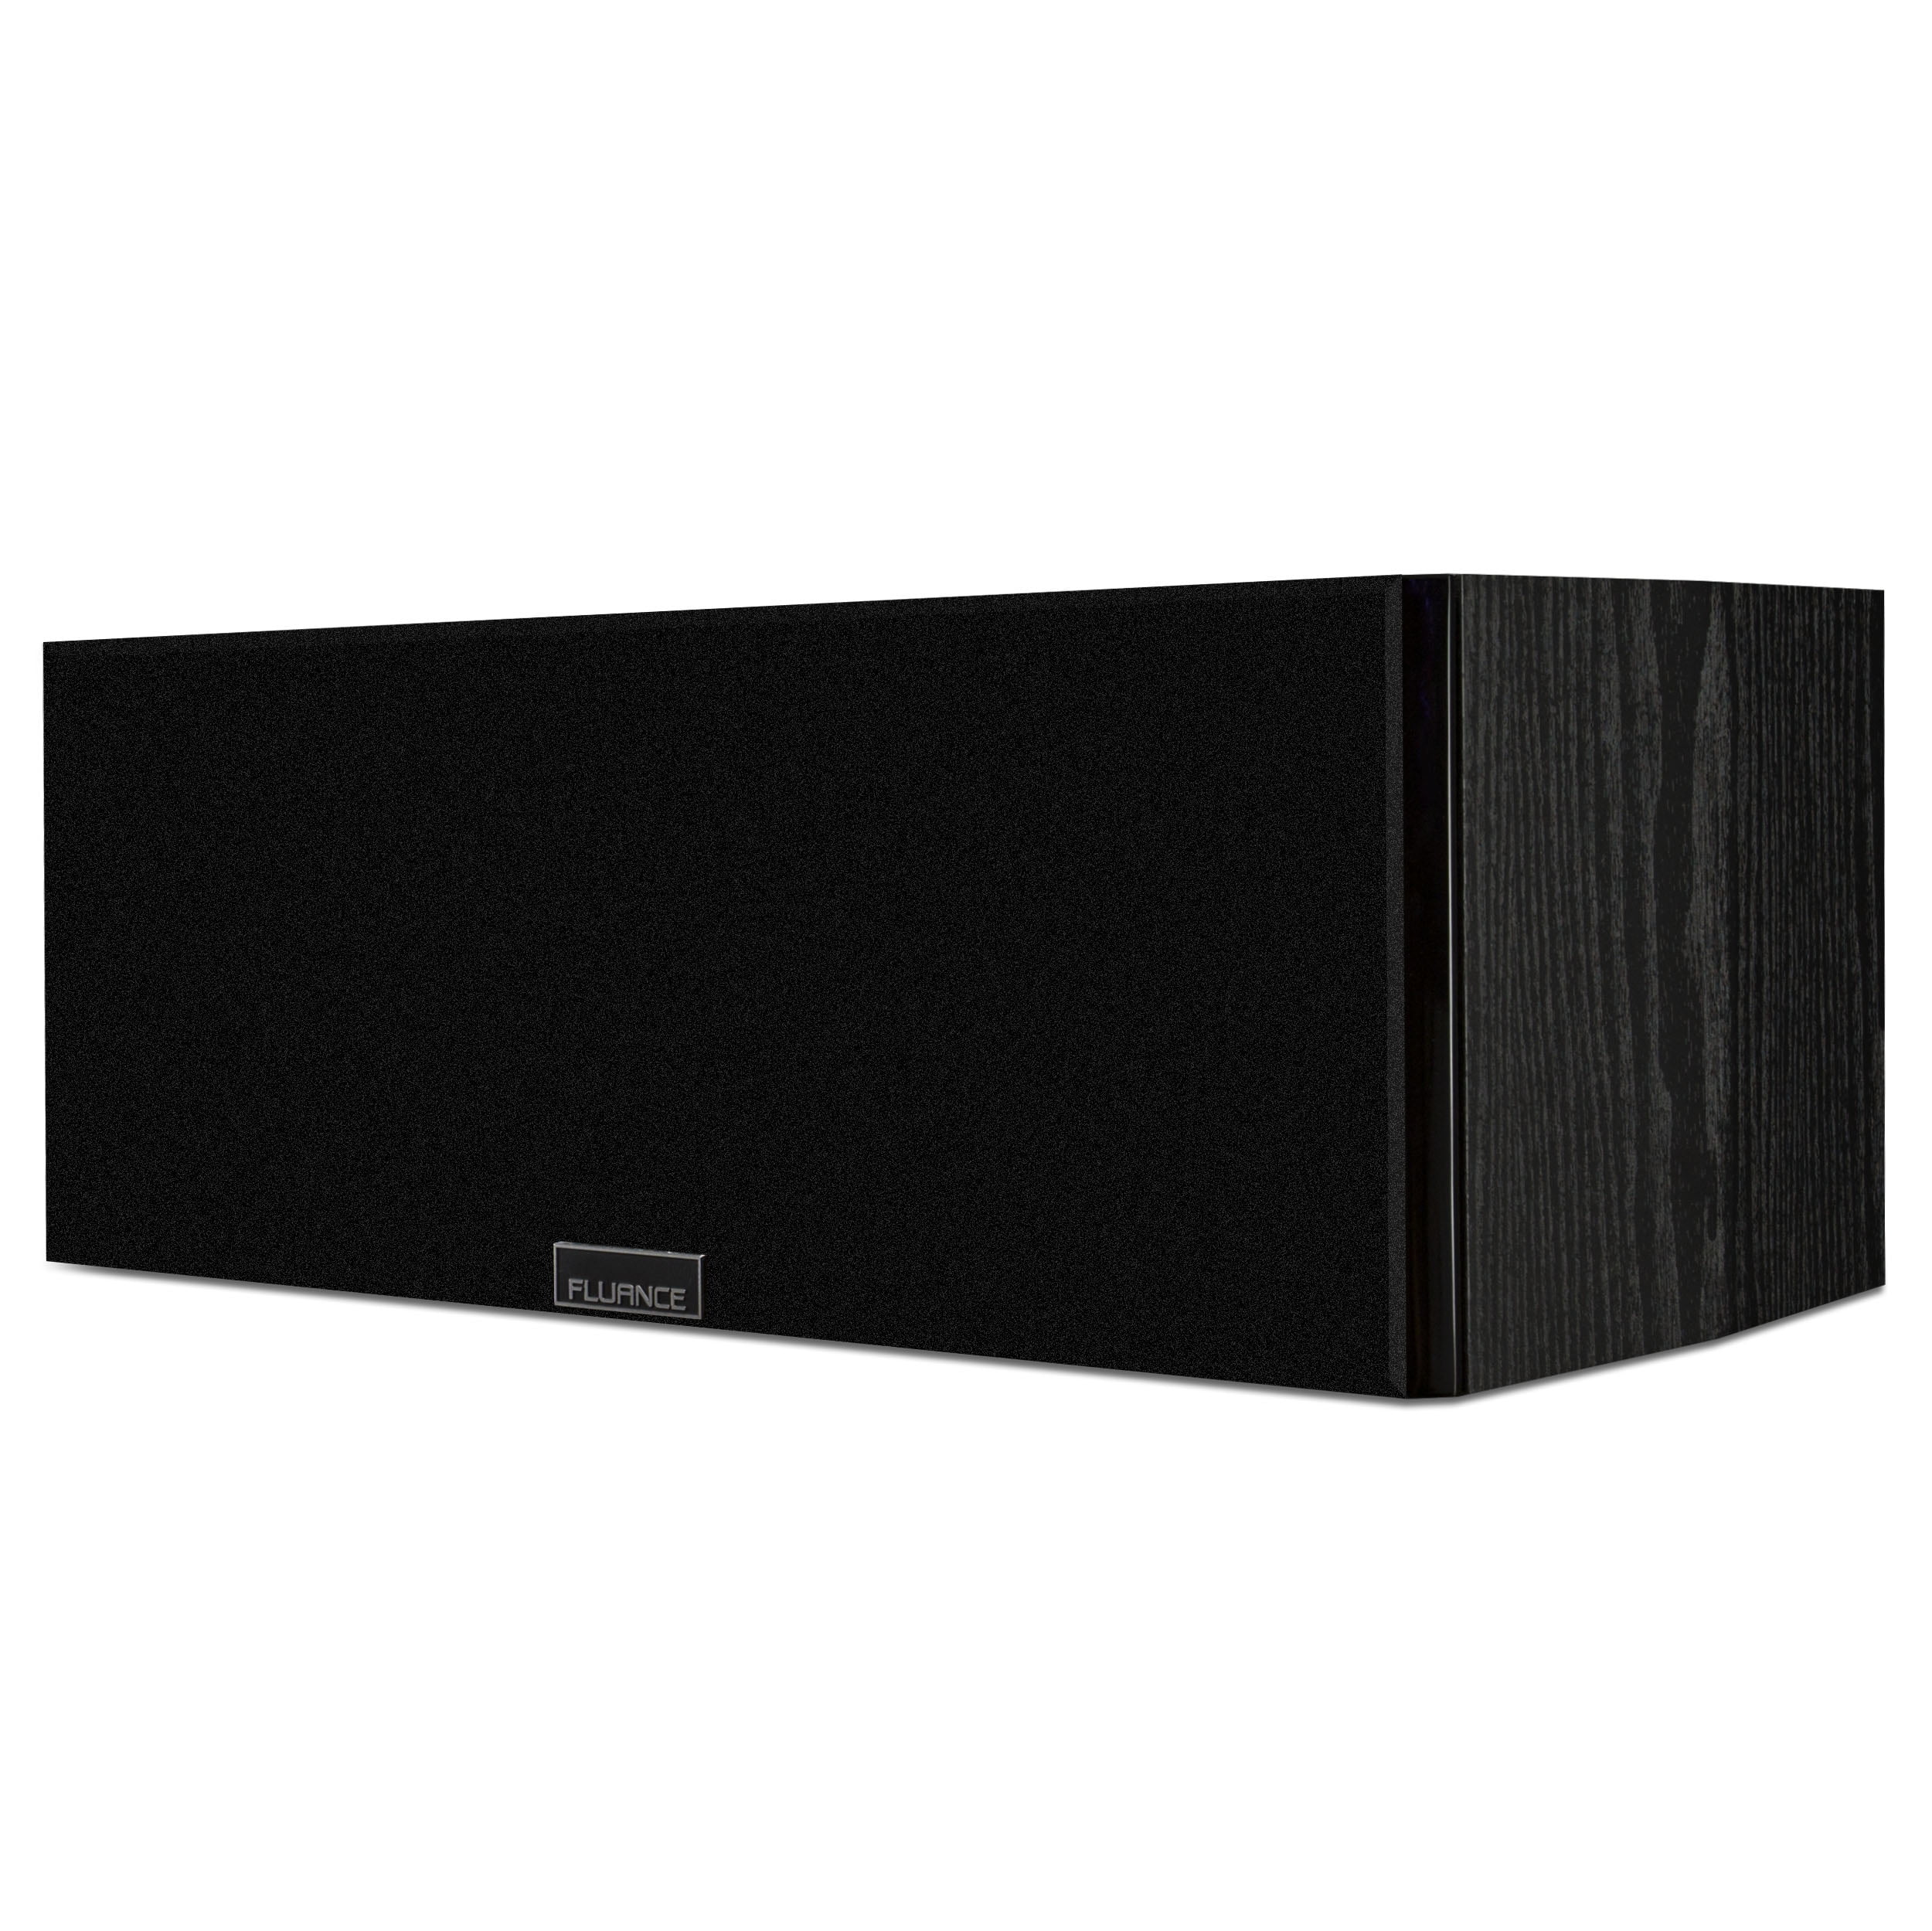 Black Ash Center and DB12 Subwoofer Fluance Signature Series Compact Surround Sound Home Theater 5.1 Channel Speaker System Including Two-Way Bookshelf Rear Surround Speakers HF51BC